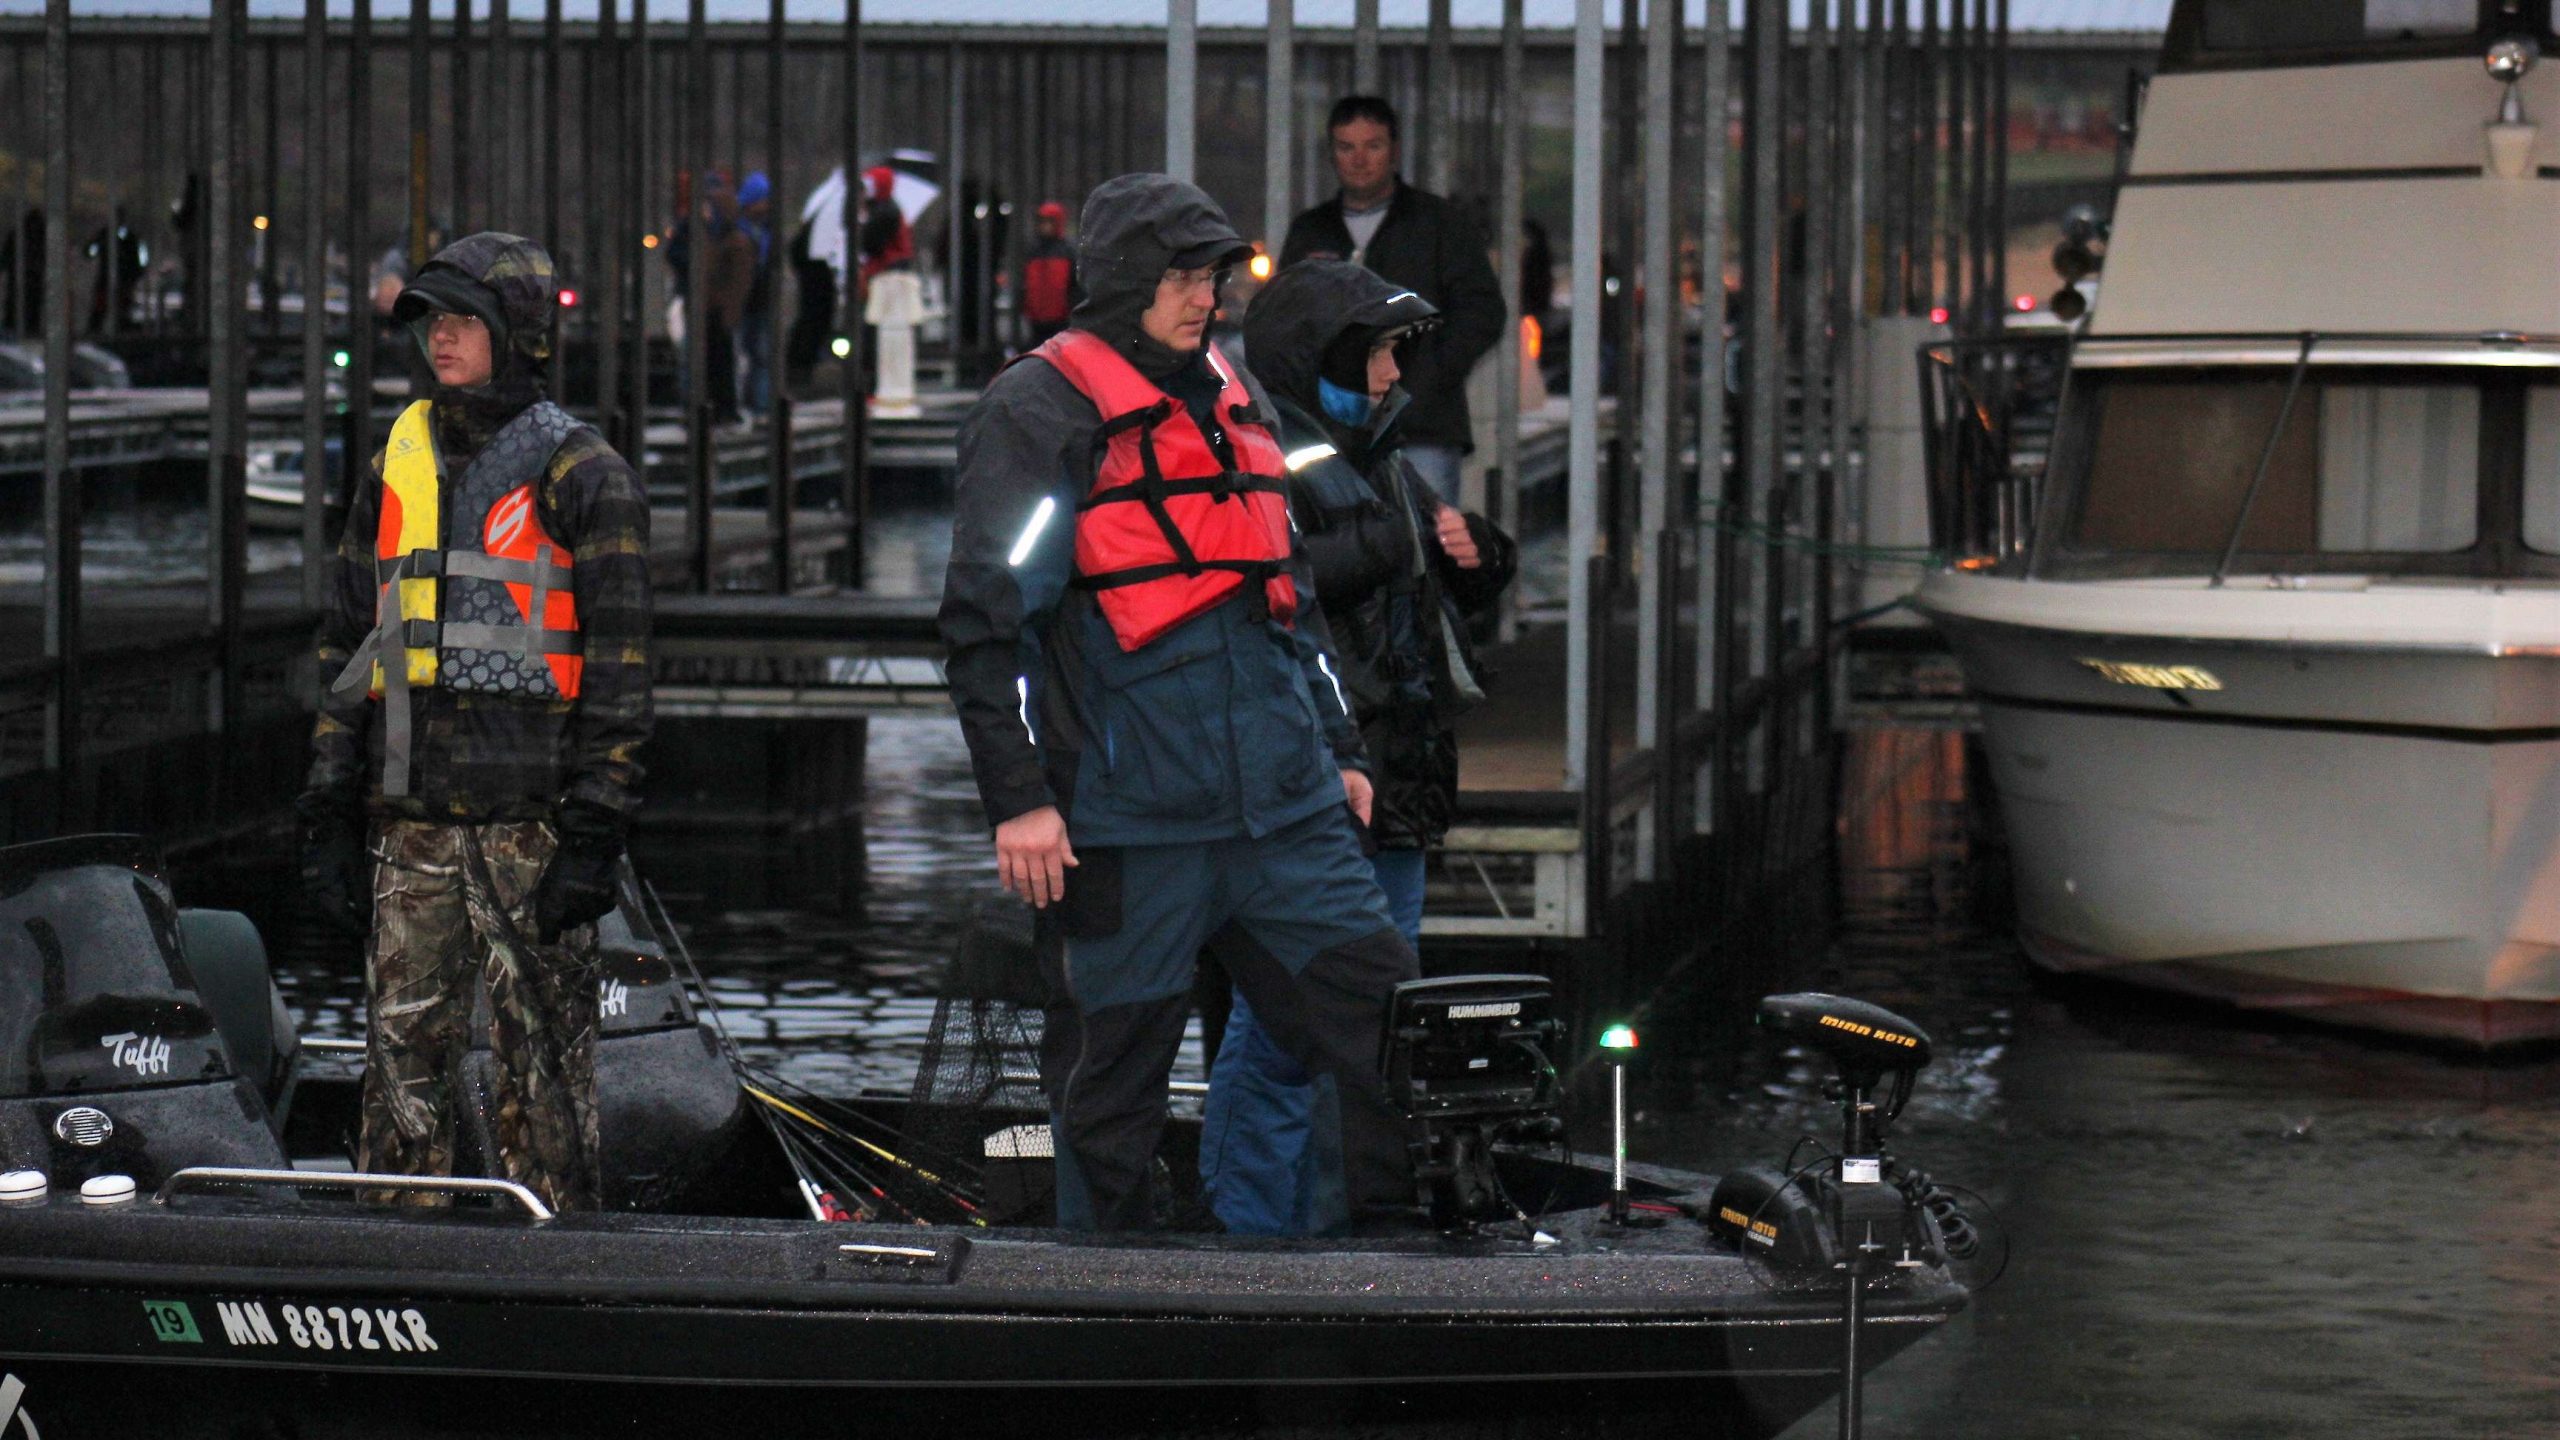 This team idles up to the dock as raindrops fall all around.